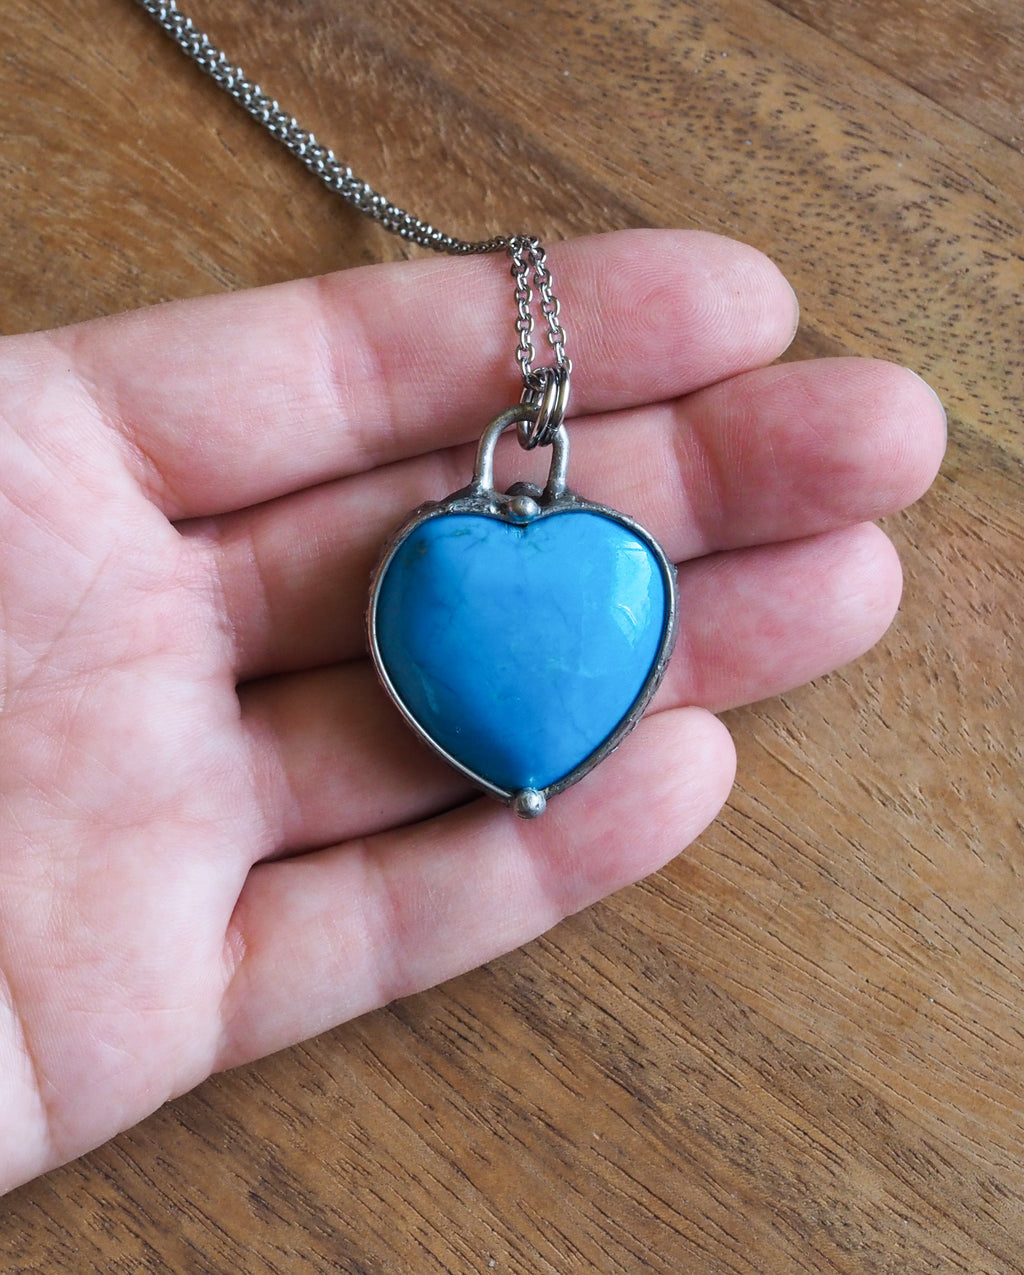 blue gemstone heart crystal necklace talisman in palm of hand